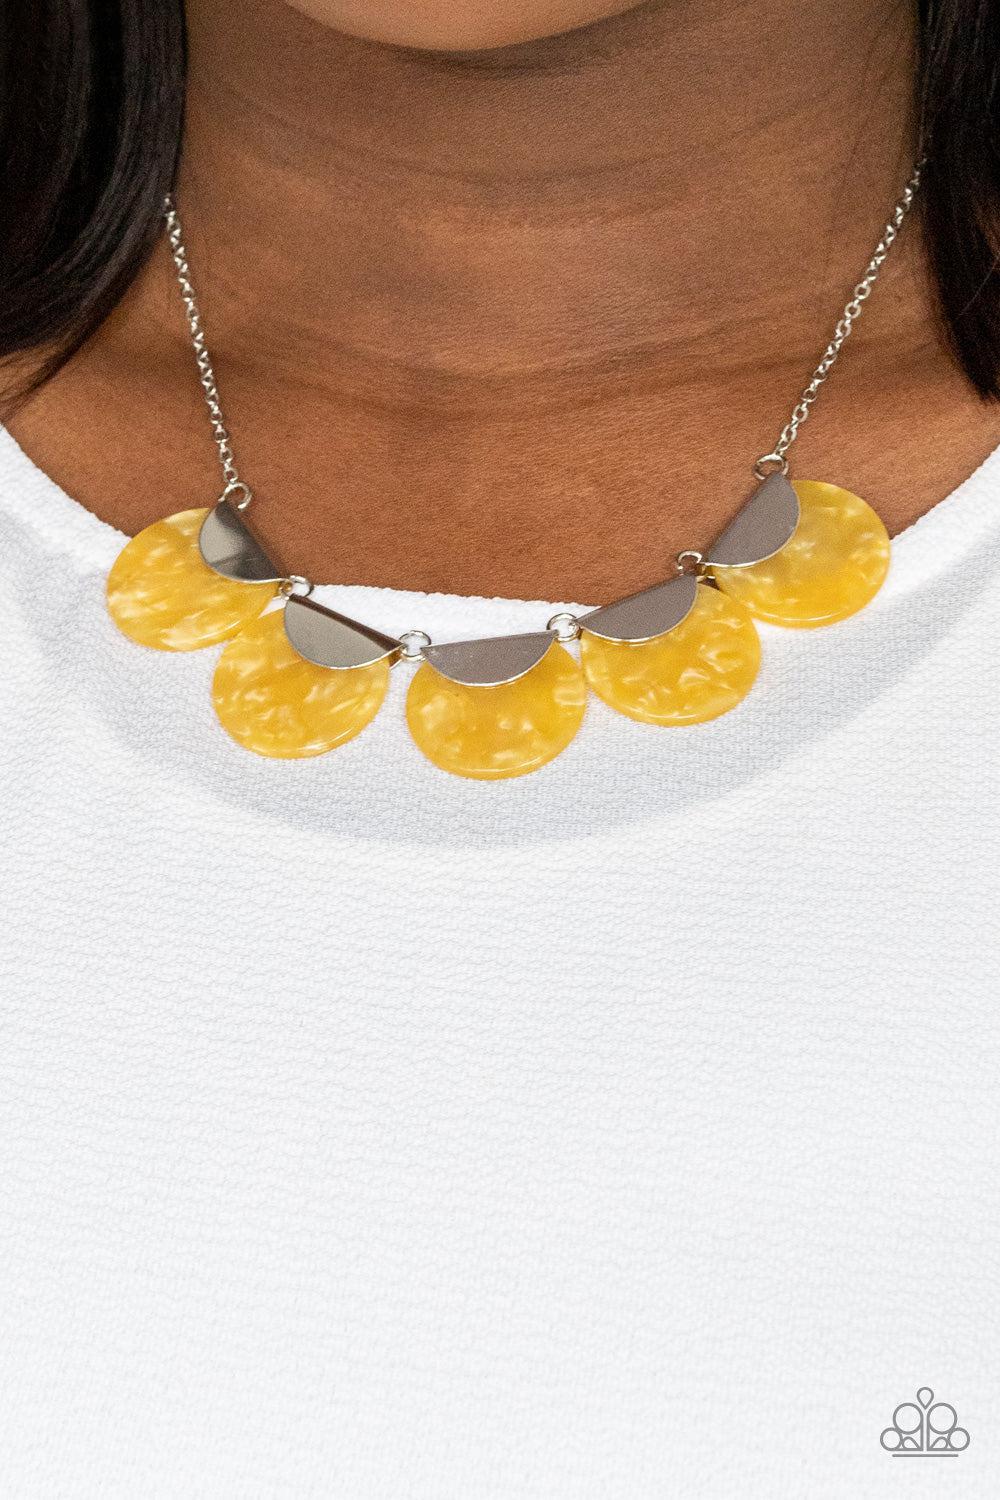 Mermaid Oasis Yellow Acrylic Necklace - Paparazzi Accessories- lightbox - CarasShop.com - $5 Jewelry by Cara Jewels